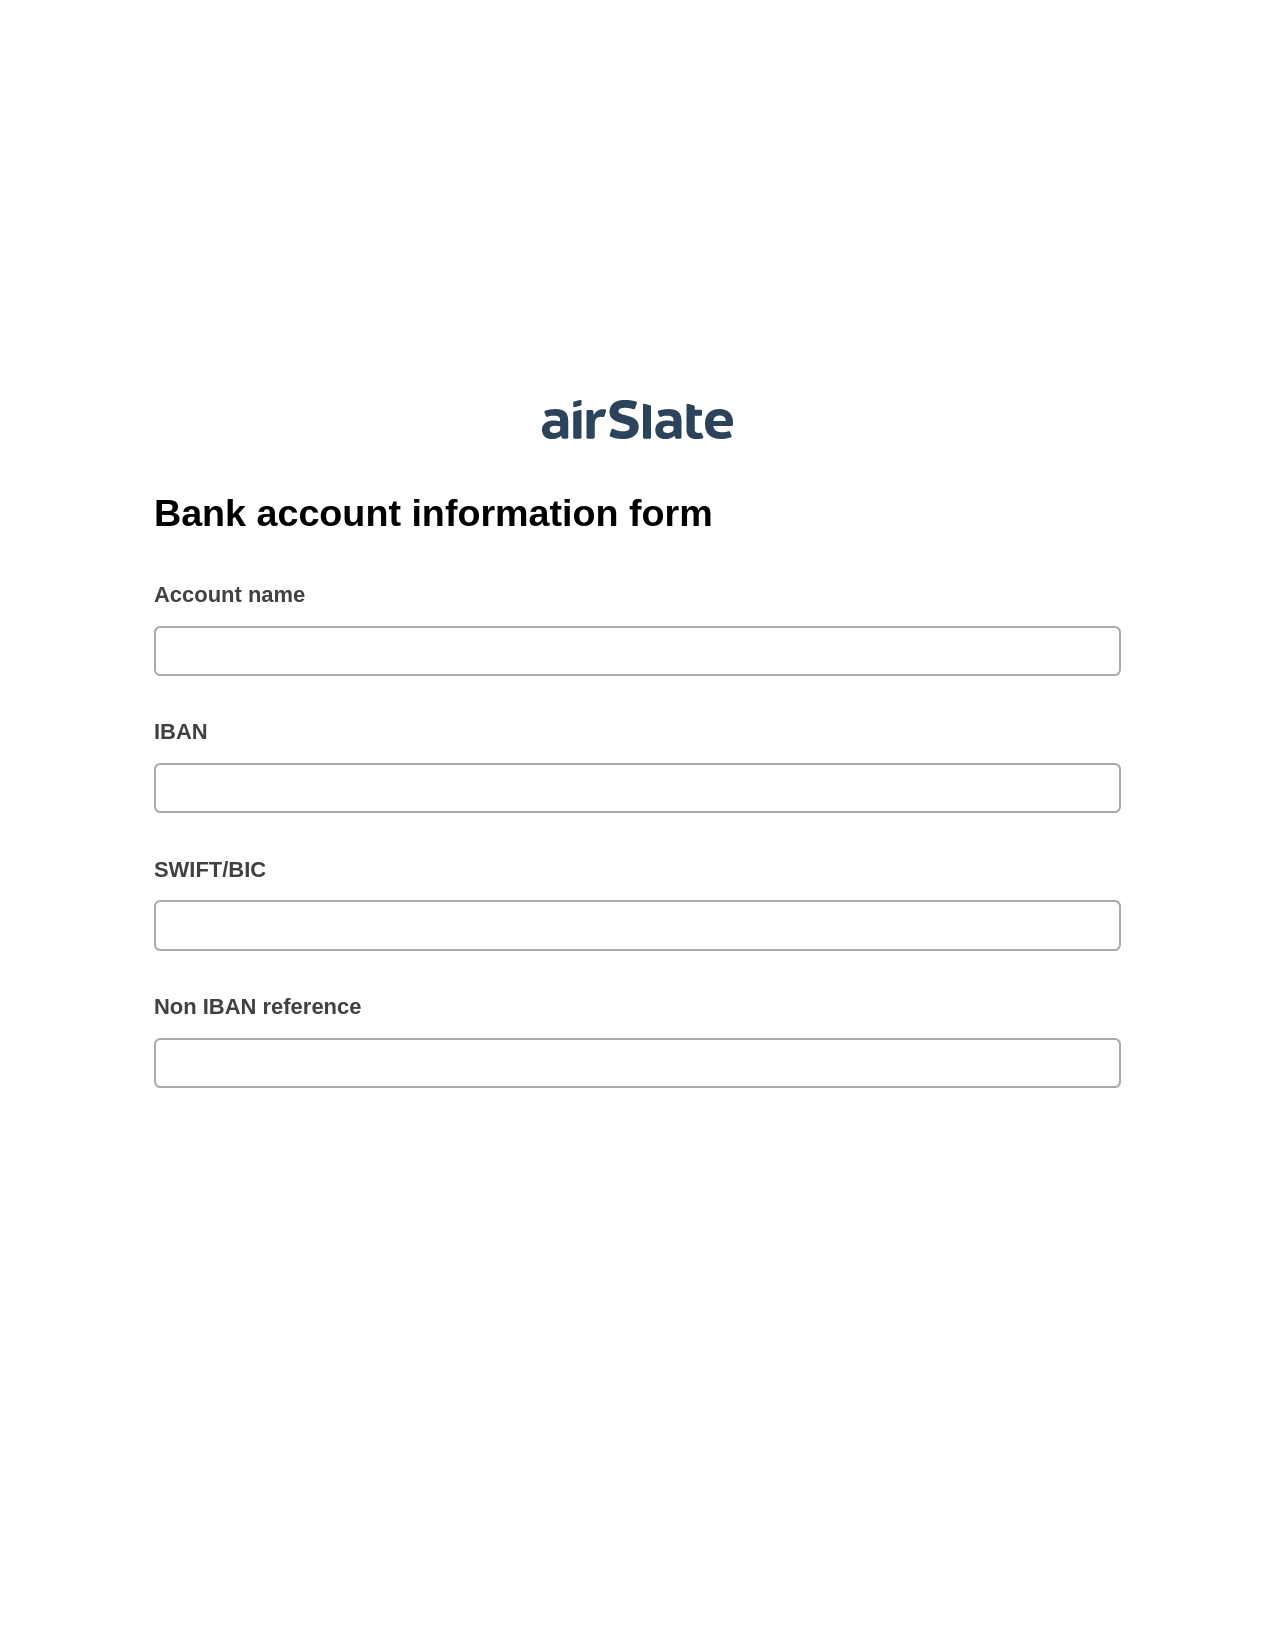 Bank account information form Pre-fill Dropdown from Airtable, Update NetSuite Records Bot, Archive to SharePoint Folder Bot